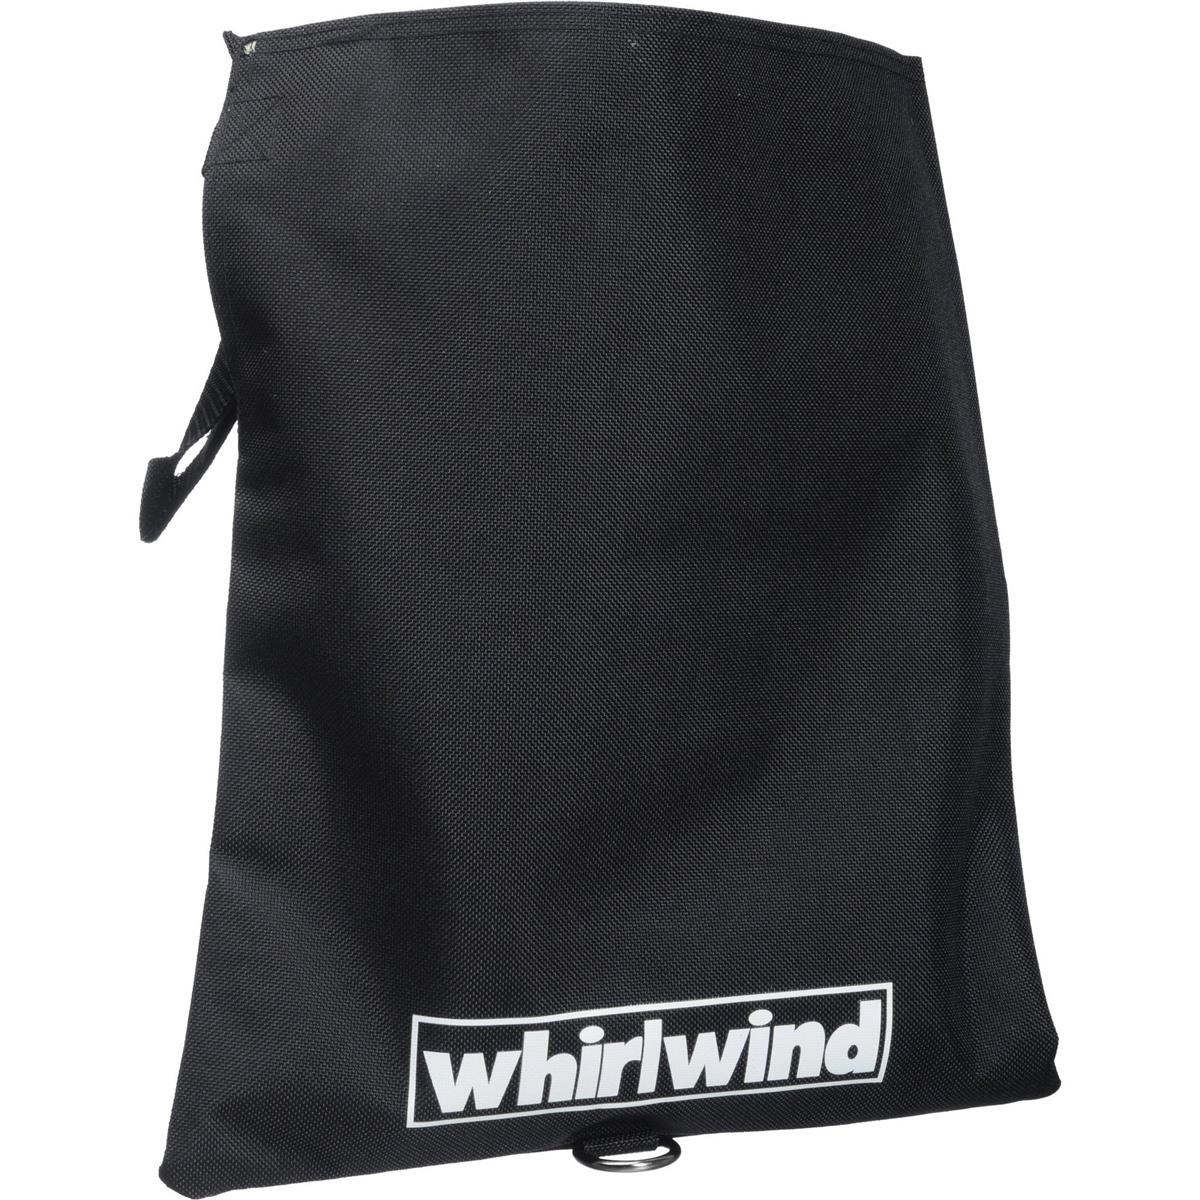 Image of Whirlwind Heavy-Duty Nylon Cable Connector Protection Bag